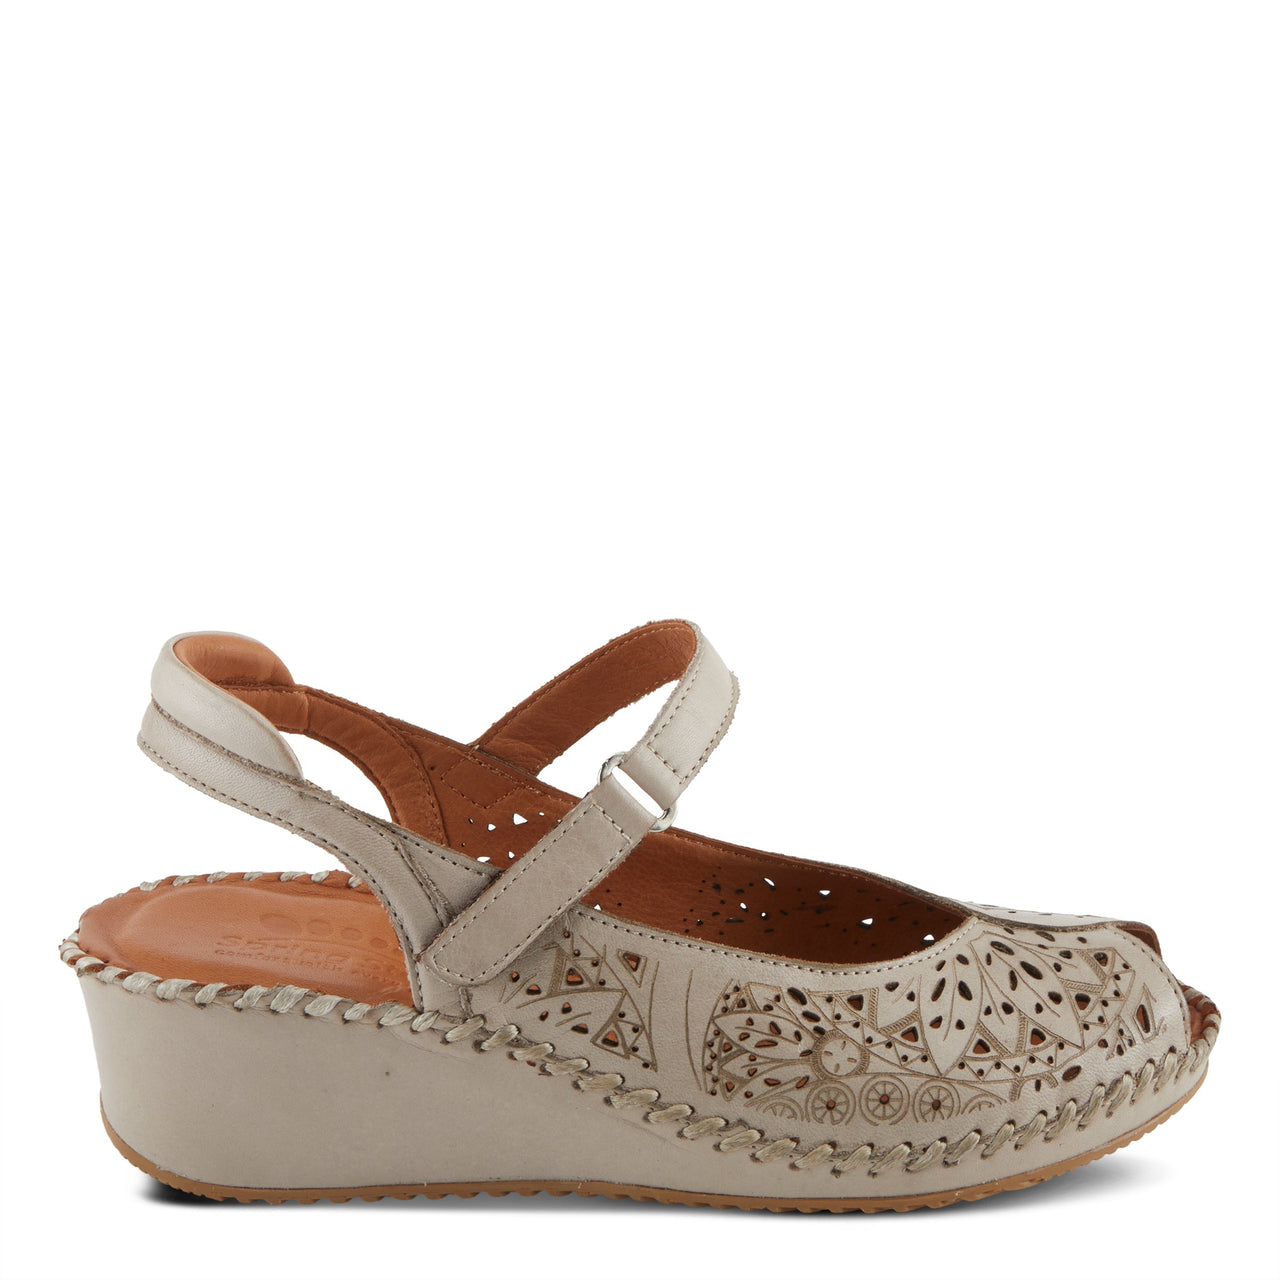 Spring Step Santonio Sandals with a stylish and comfortable design